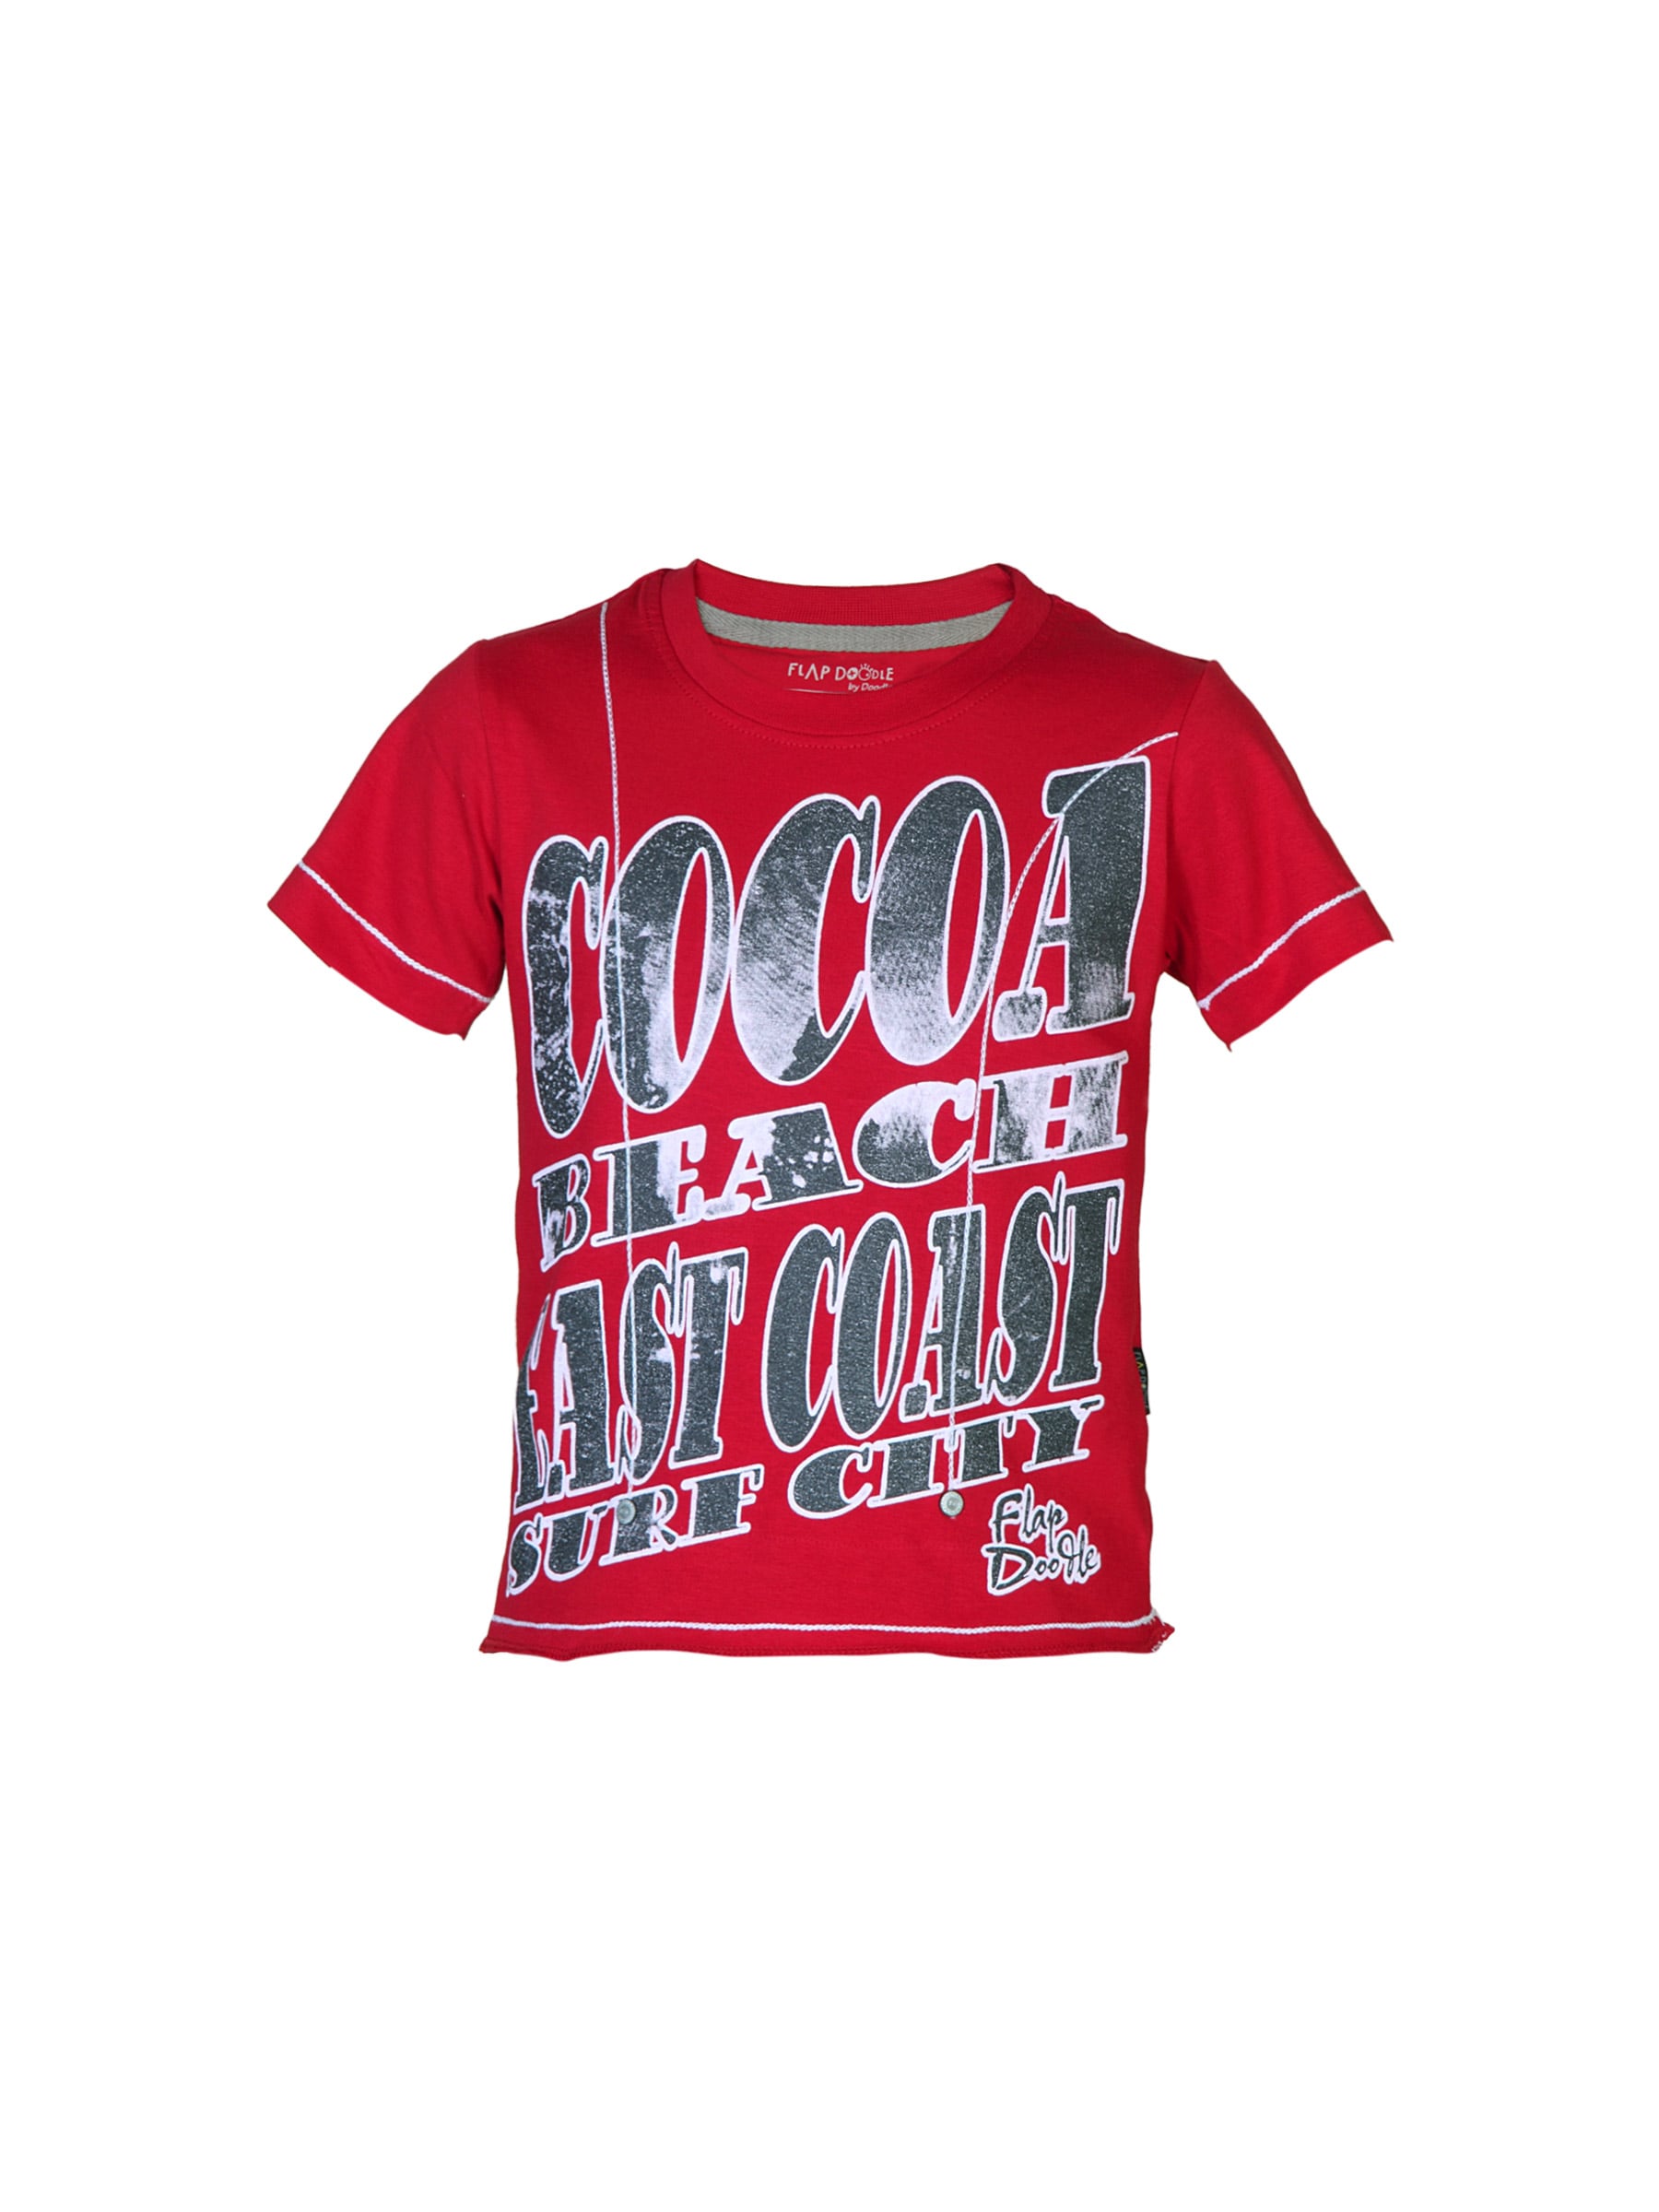 Doodle Boys Printed Red T-shirt